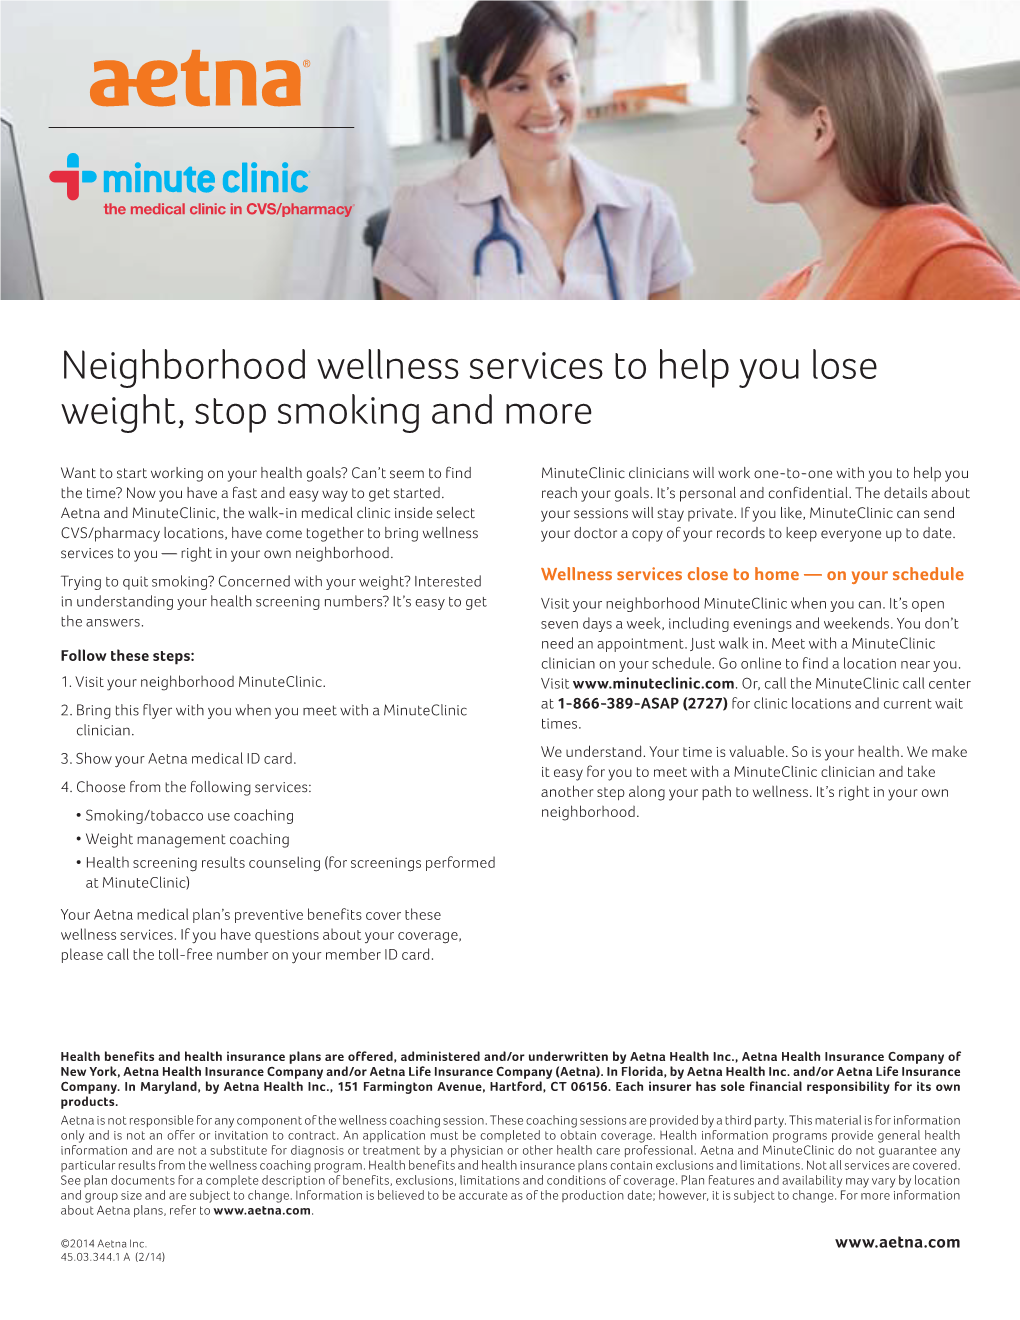 Neighborhood Wellness Services to Help You Lose Weight, Stop Smoking and More